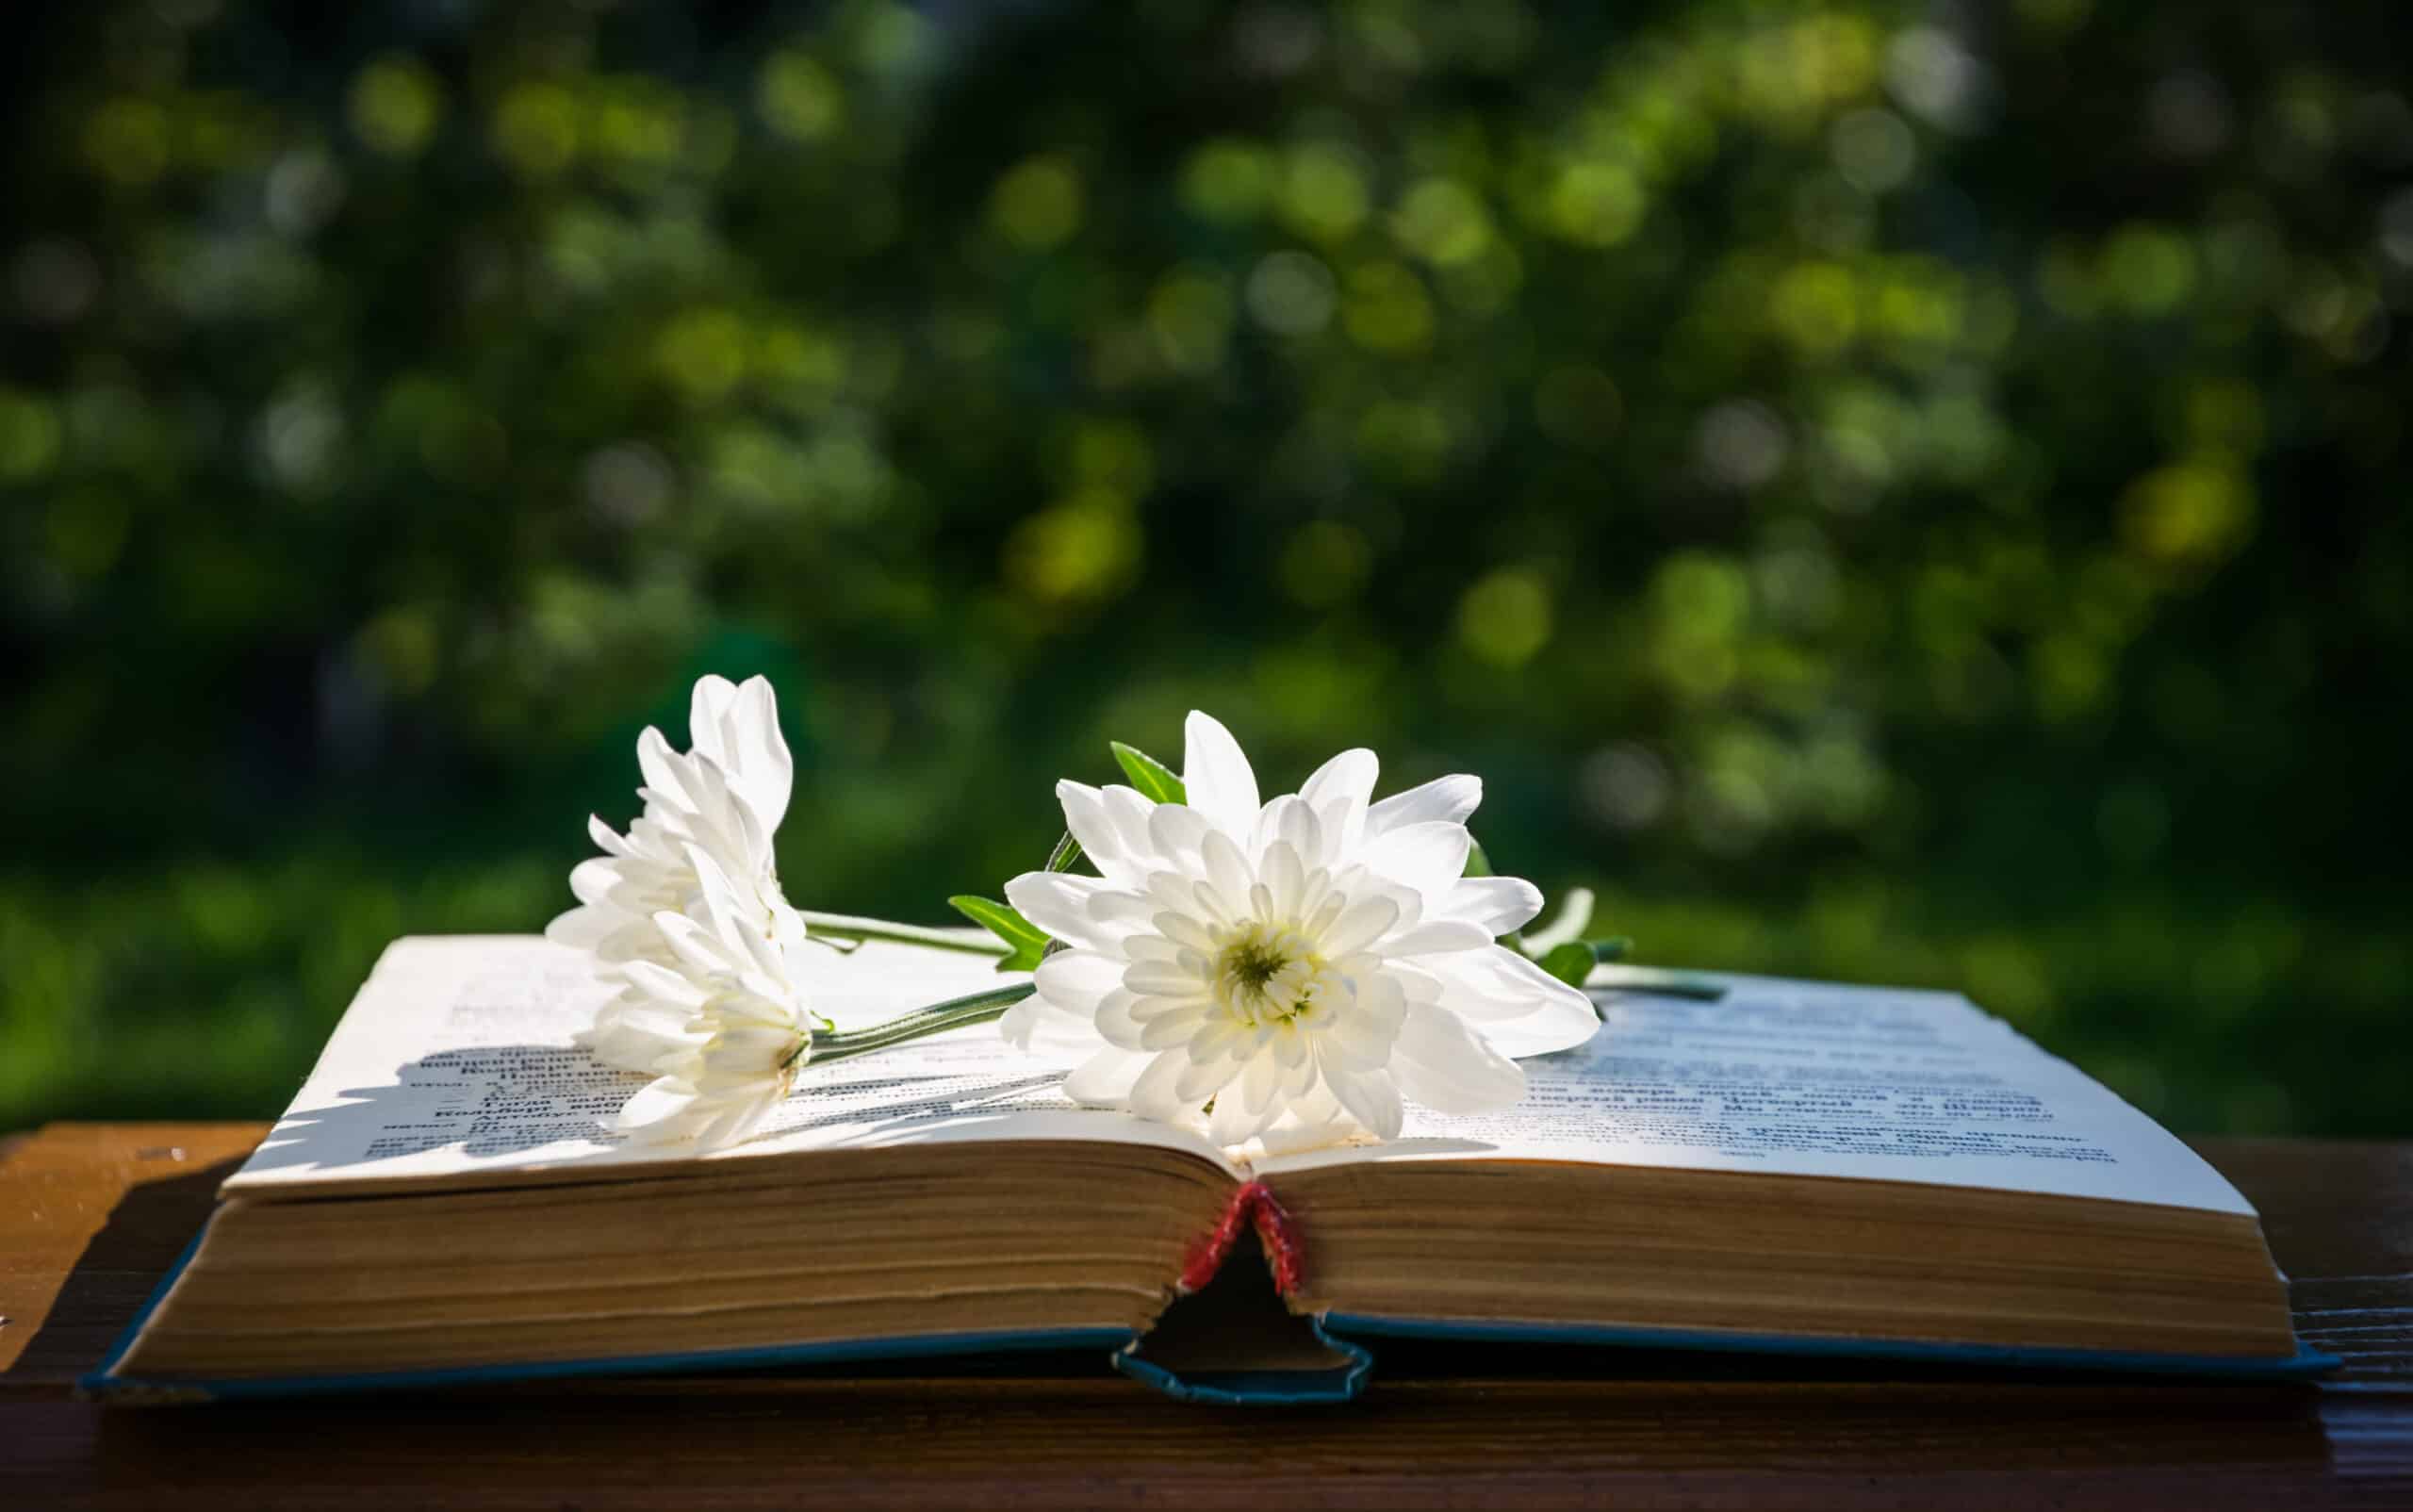 White chrysanthemums and an old book